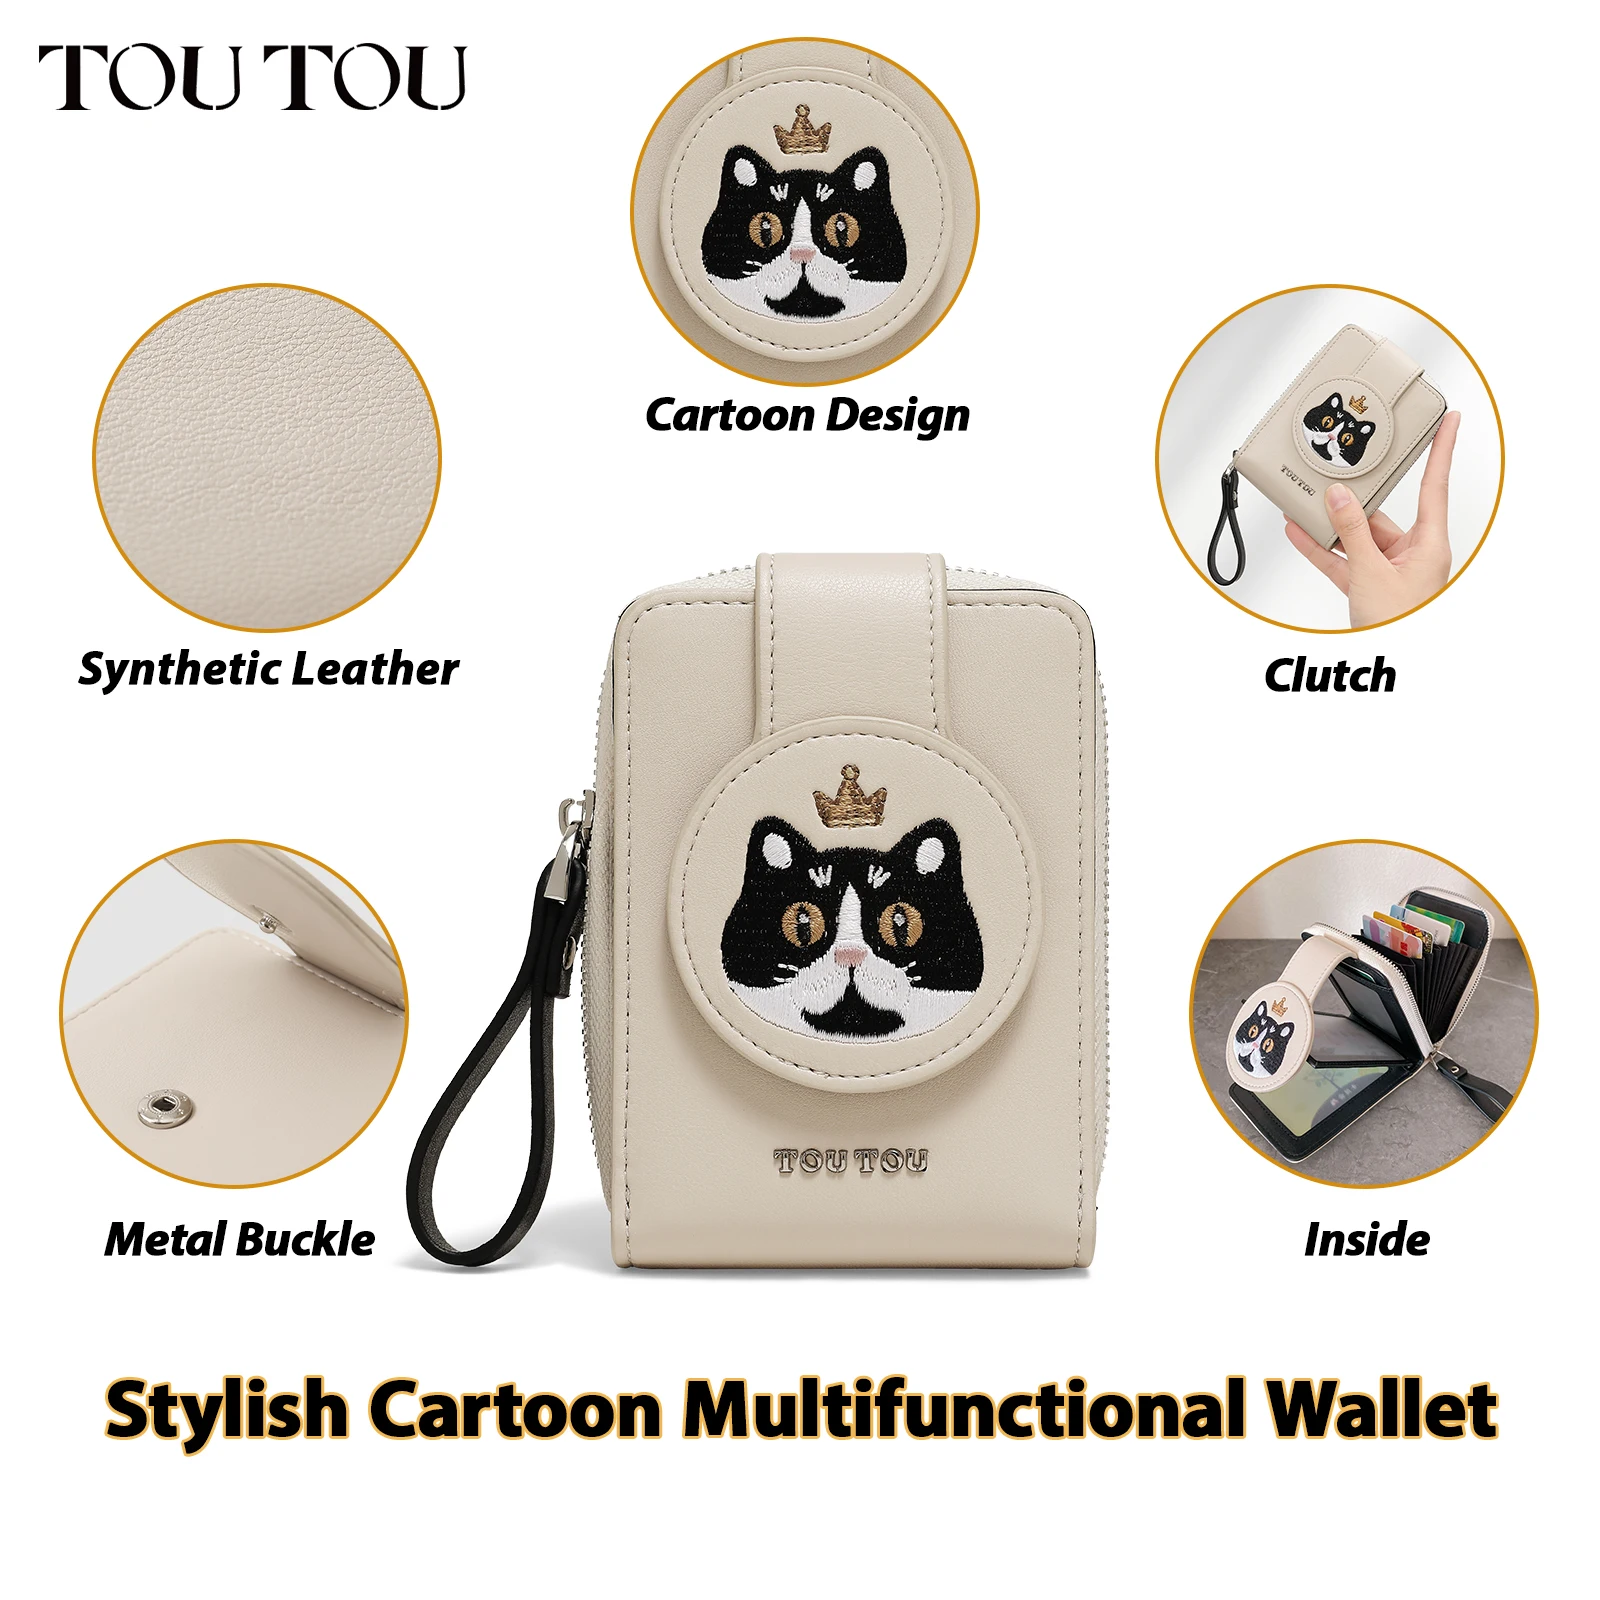 

TOUTOU Women Wallet Cat Pattern Large Capacity Card Holder Portable Lightweight Female Purse Clutches for Key Storage Bag